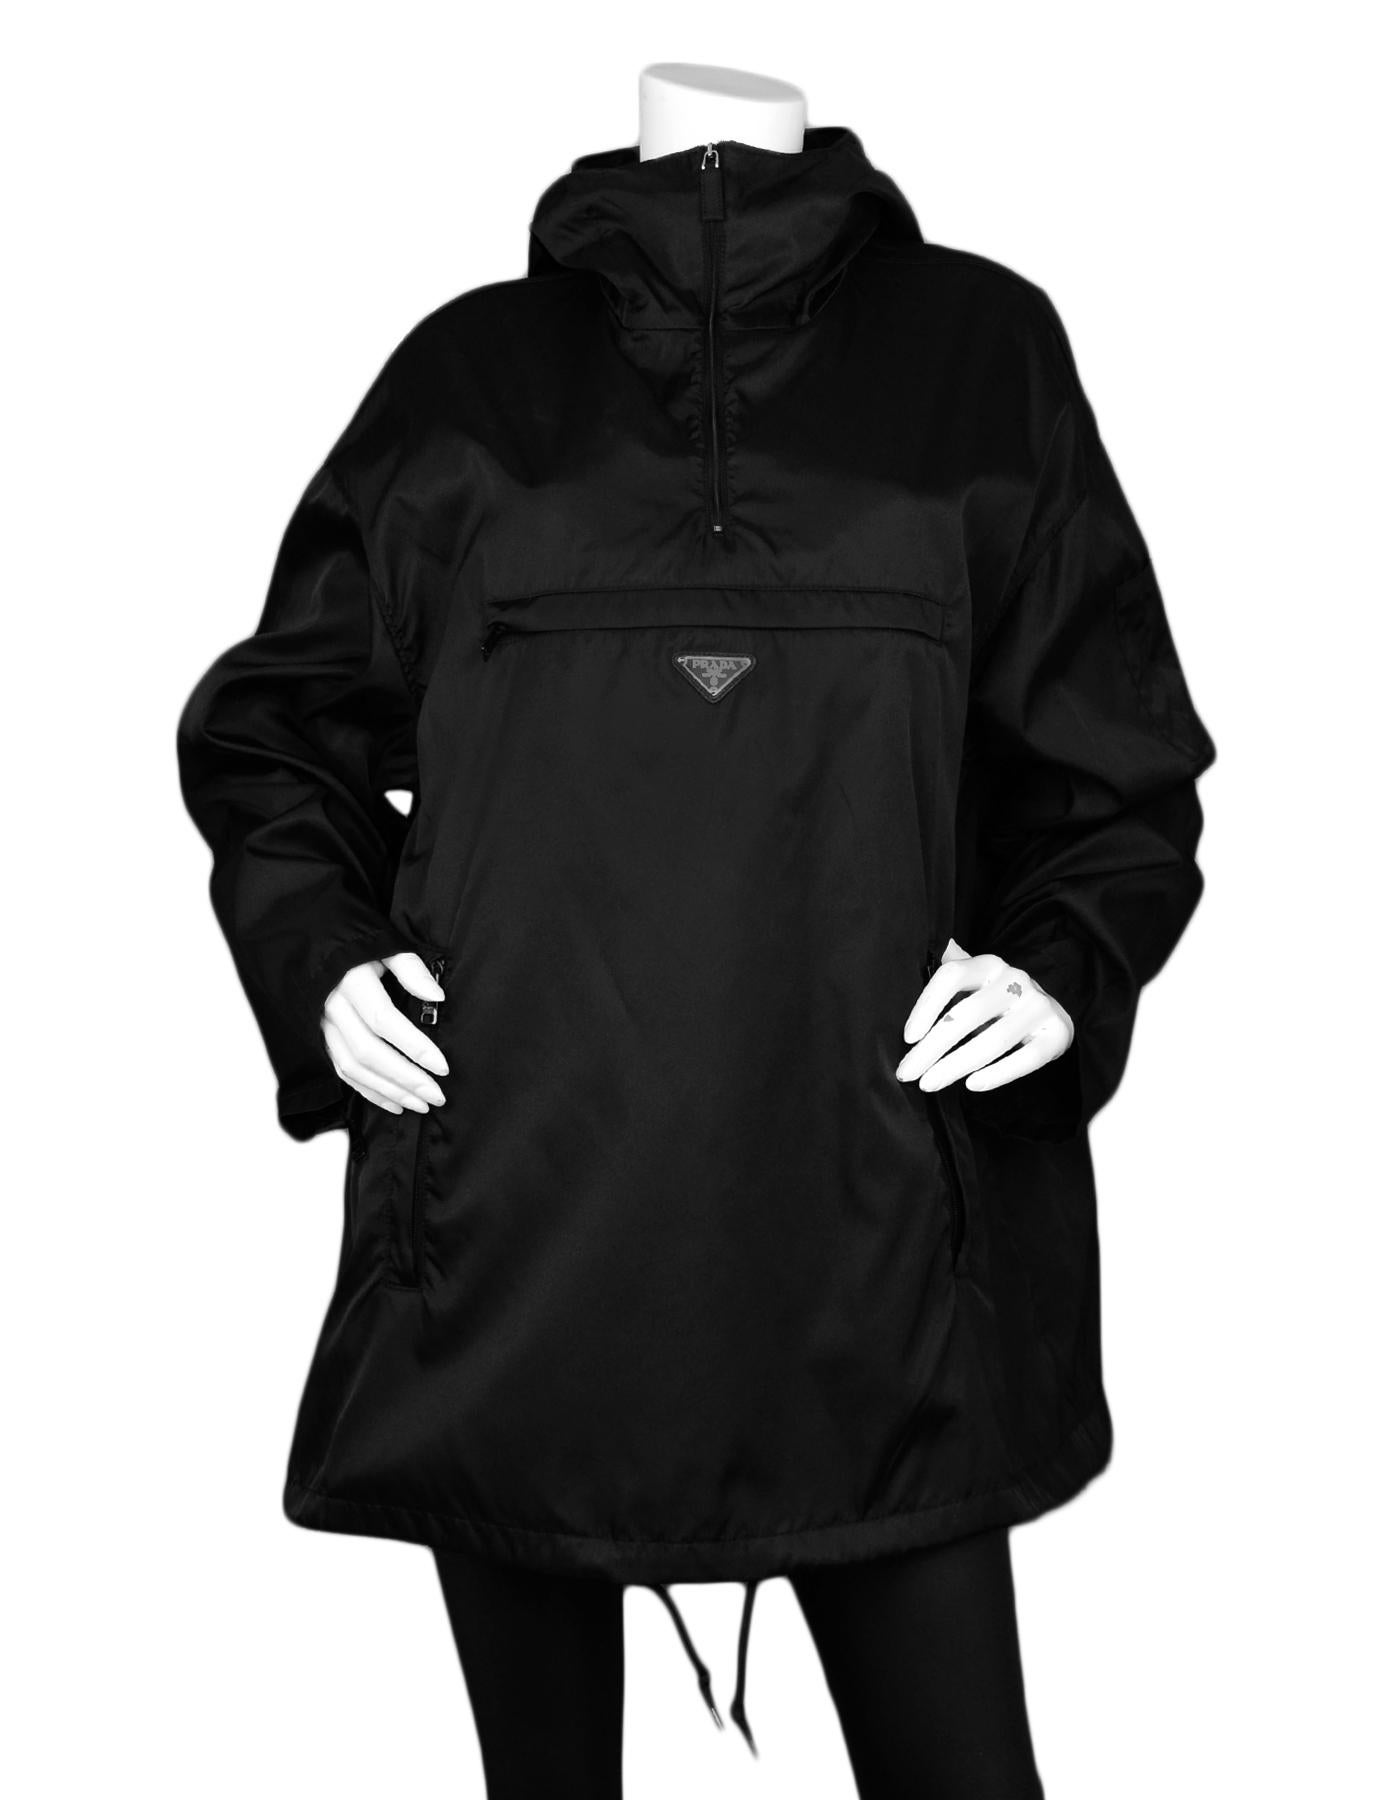 Prada Men's Black Nylon Gabardine Anorak Jacket sz XL rt $1,360 . Features hood.

Made In: Romania
Color: Black
Materials: 100% nylon
Lining: 100% polyamide
Opening/Closure:  Pullover
Overall Condition: Excellent pre-owned condition, with the